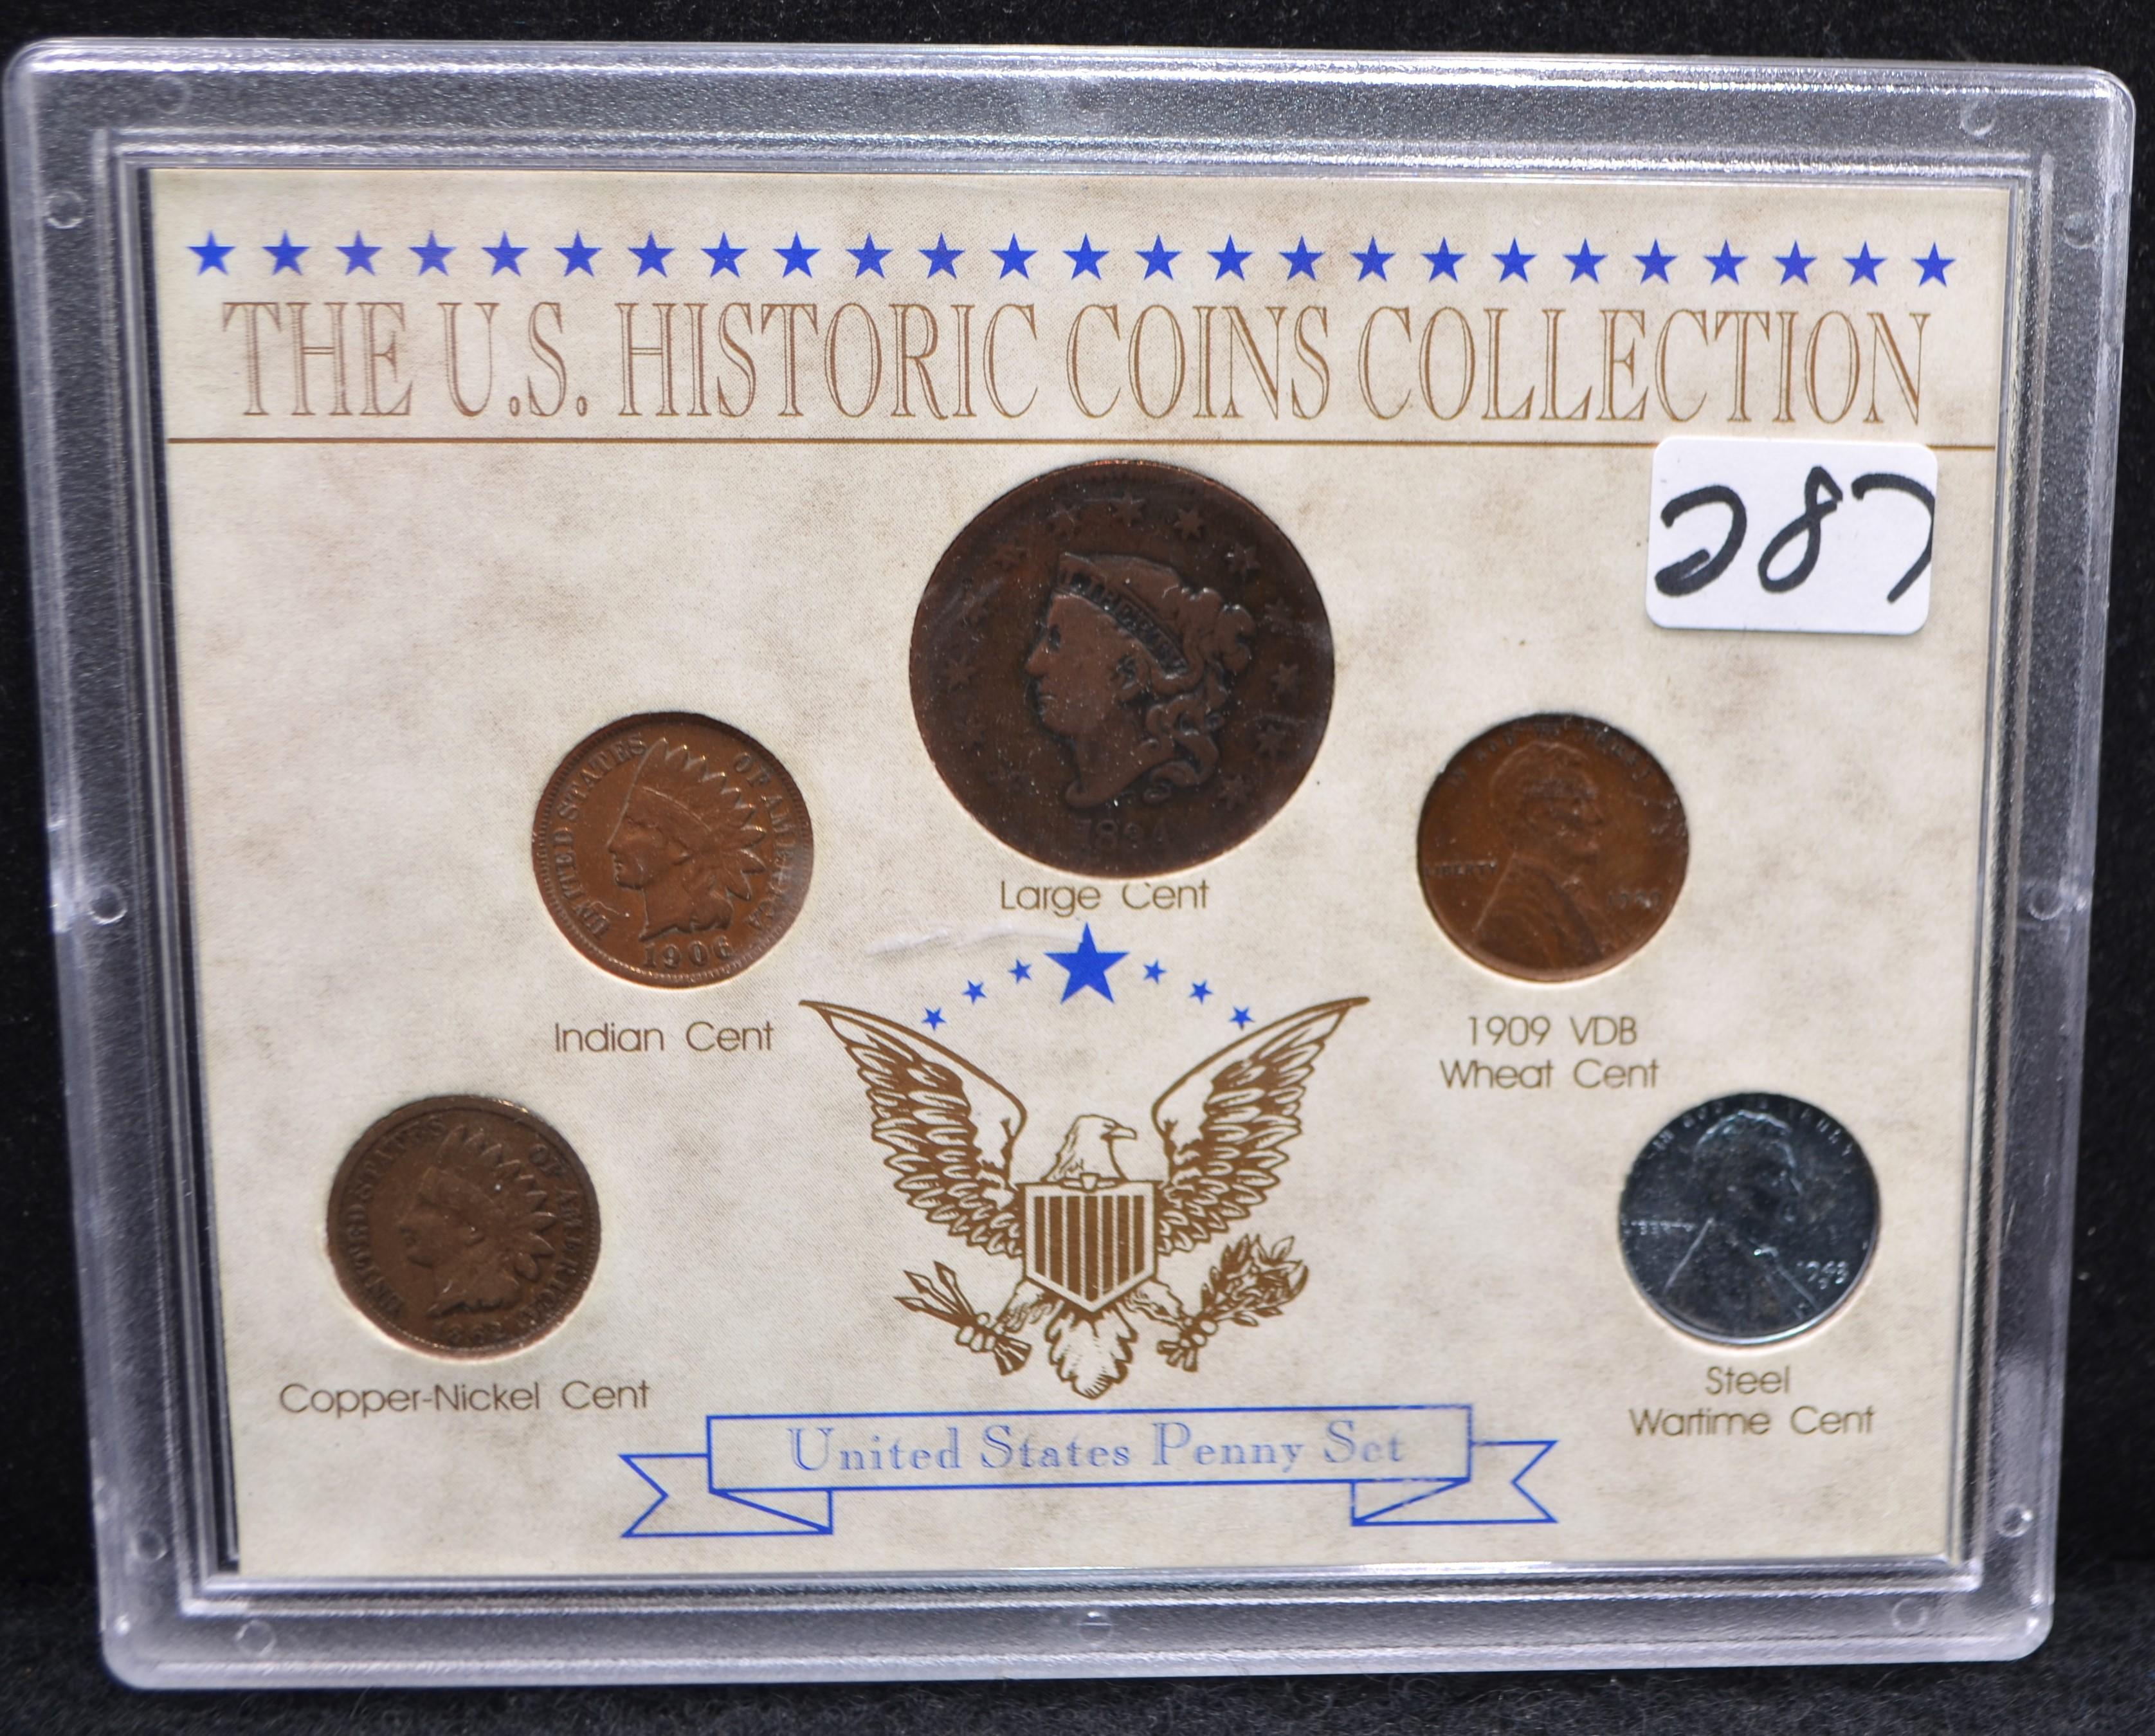 THE U.S.HISTORIC COINS COLLECTION